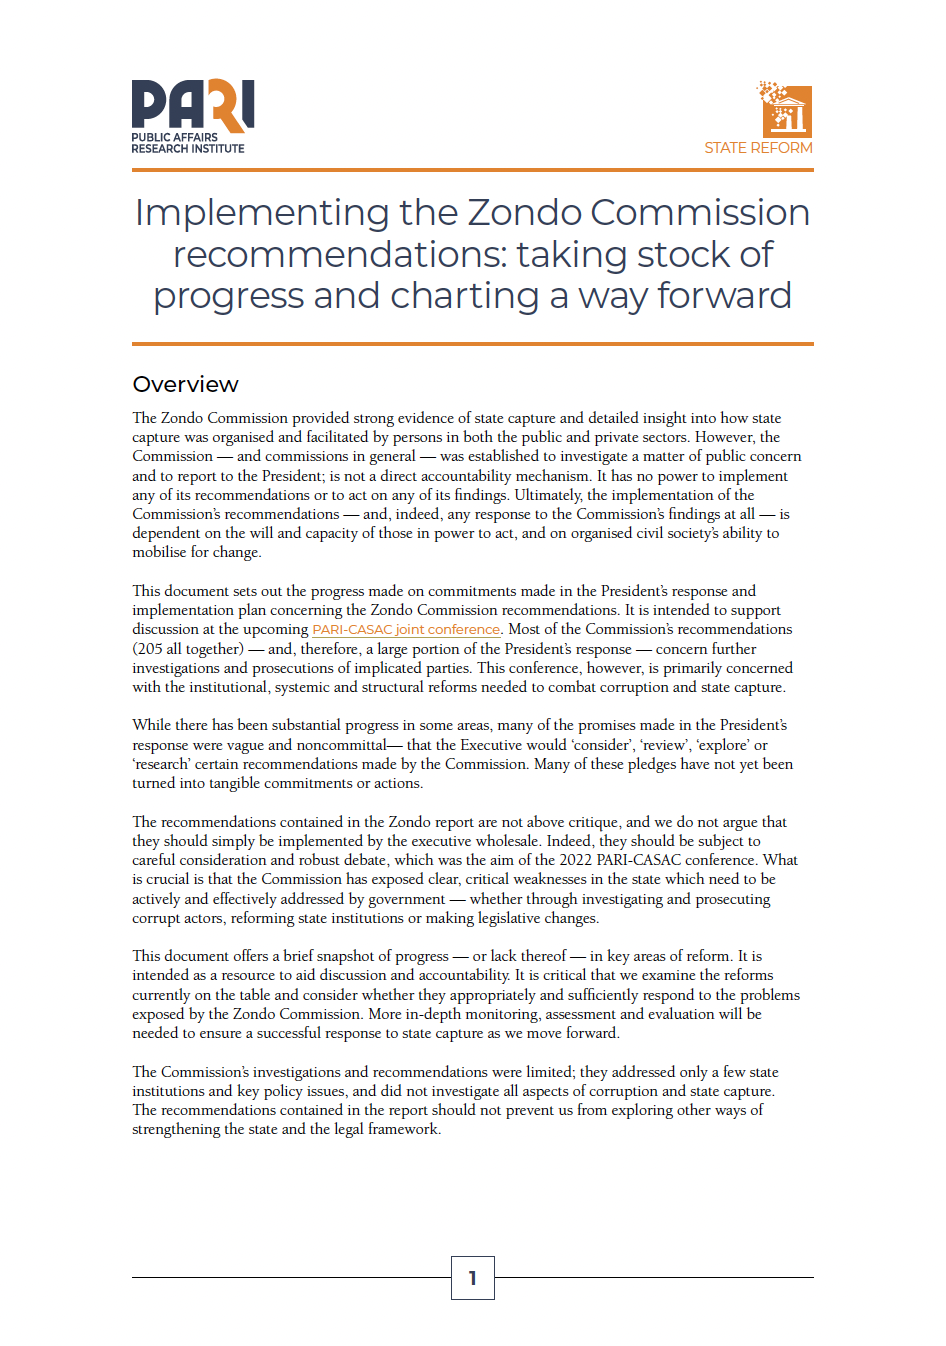 Discussion Document | Implementing the Zondo Commission Recommendations: Taking stock of progress and charting a way forward